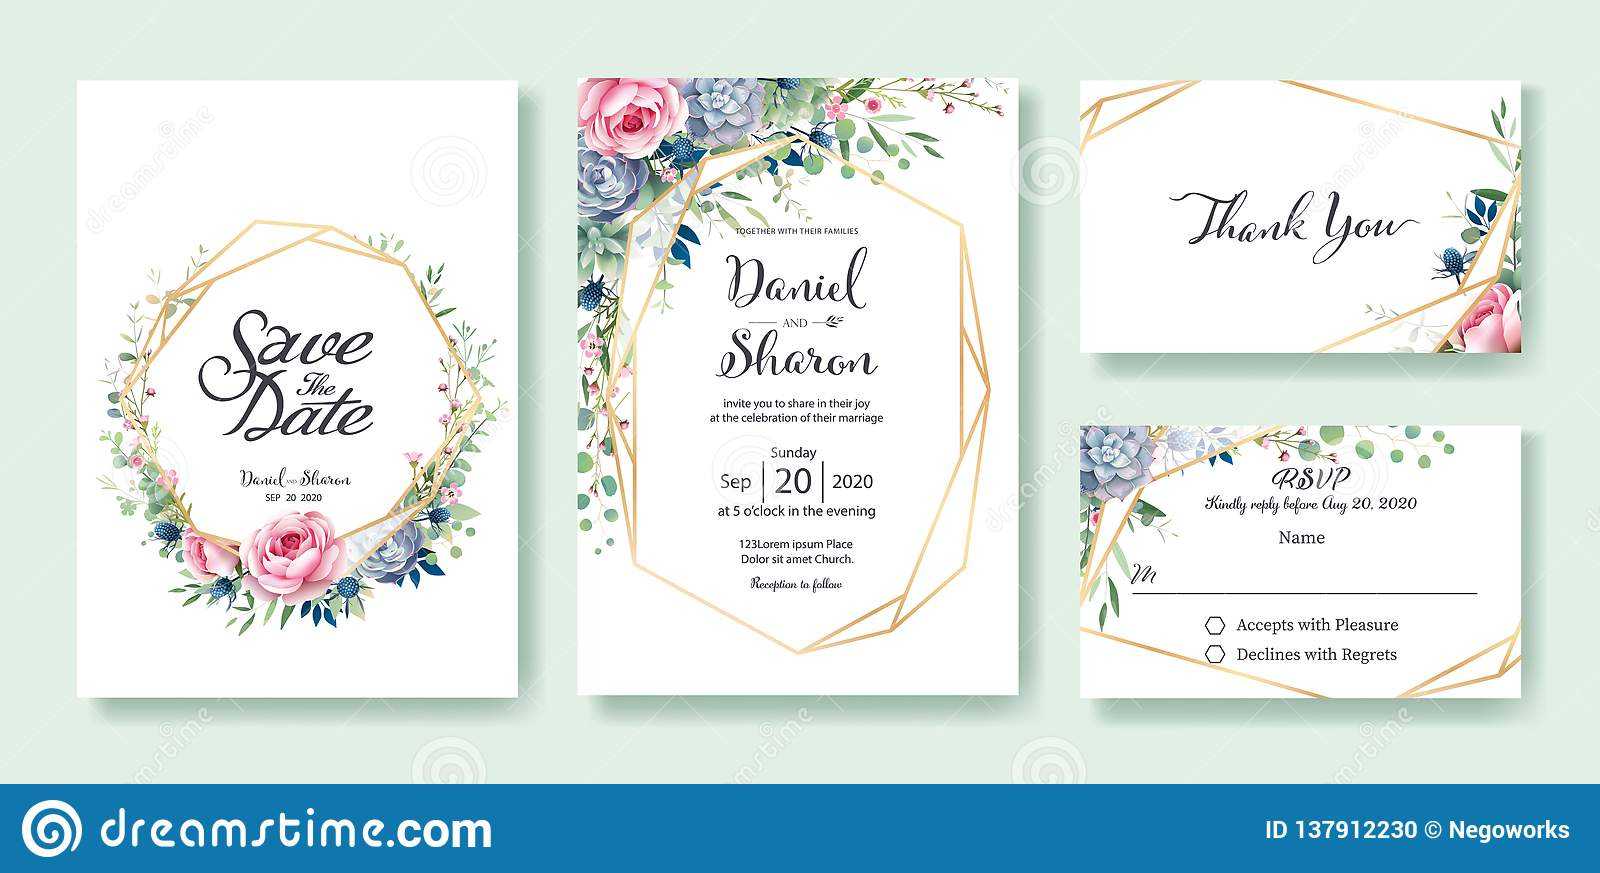 Wedding Invitation, Save The Date, Thank You, Rsvp Card Throughout Free Printable Wedding Rsvp Card Templates